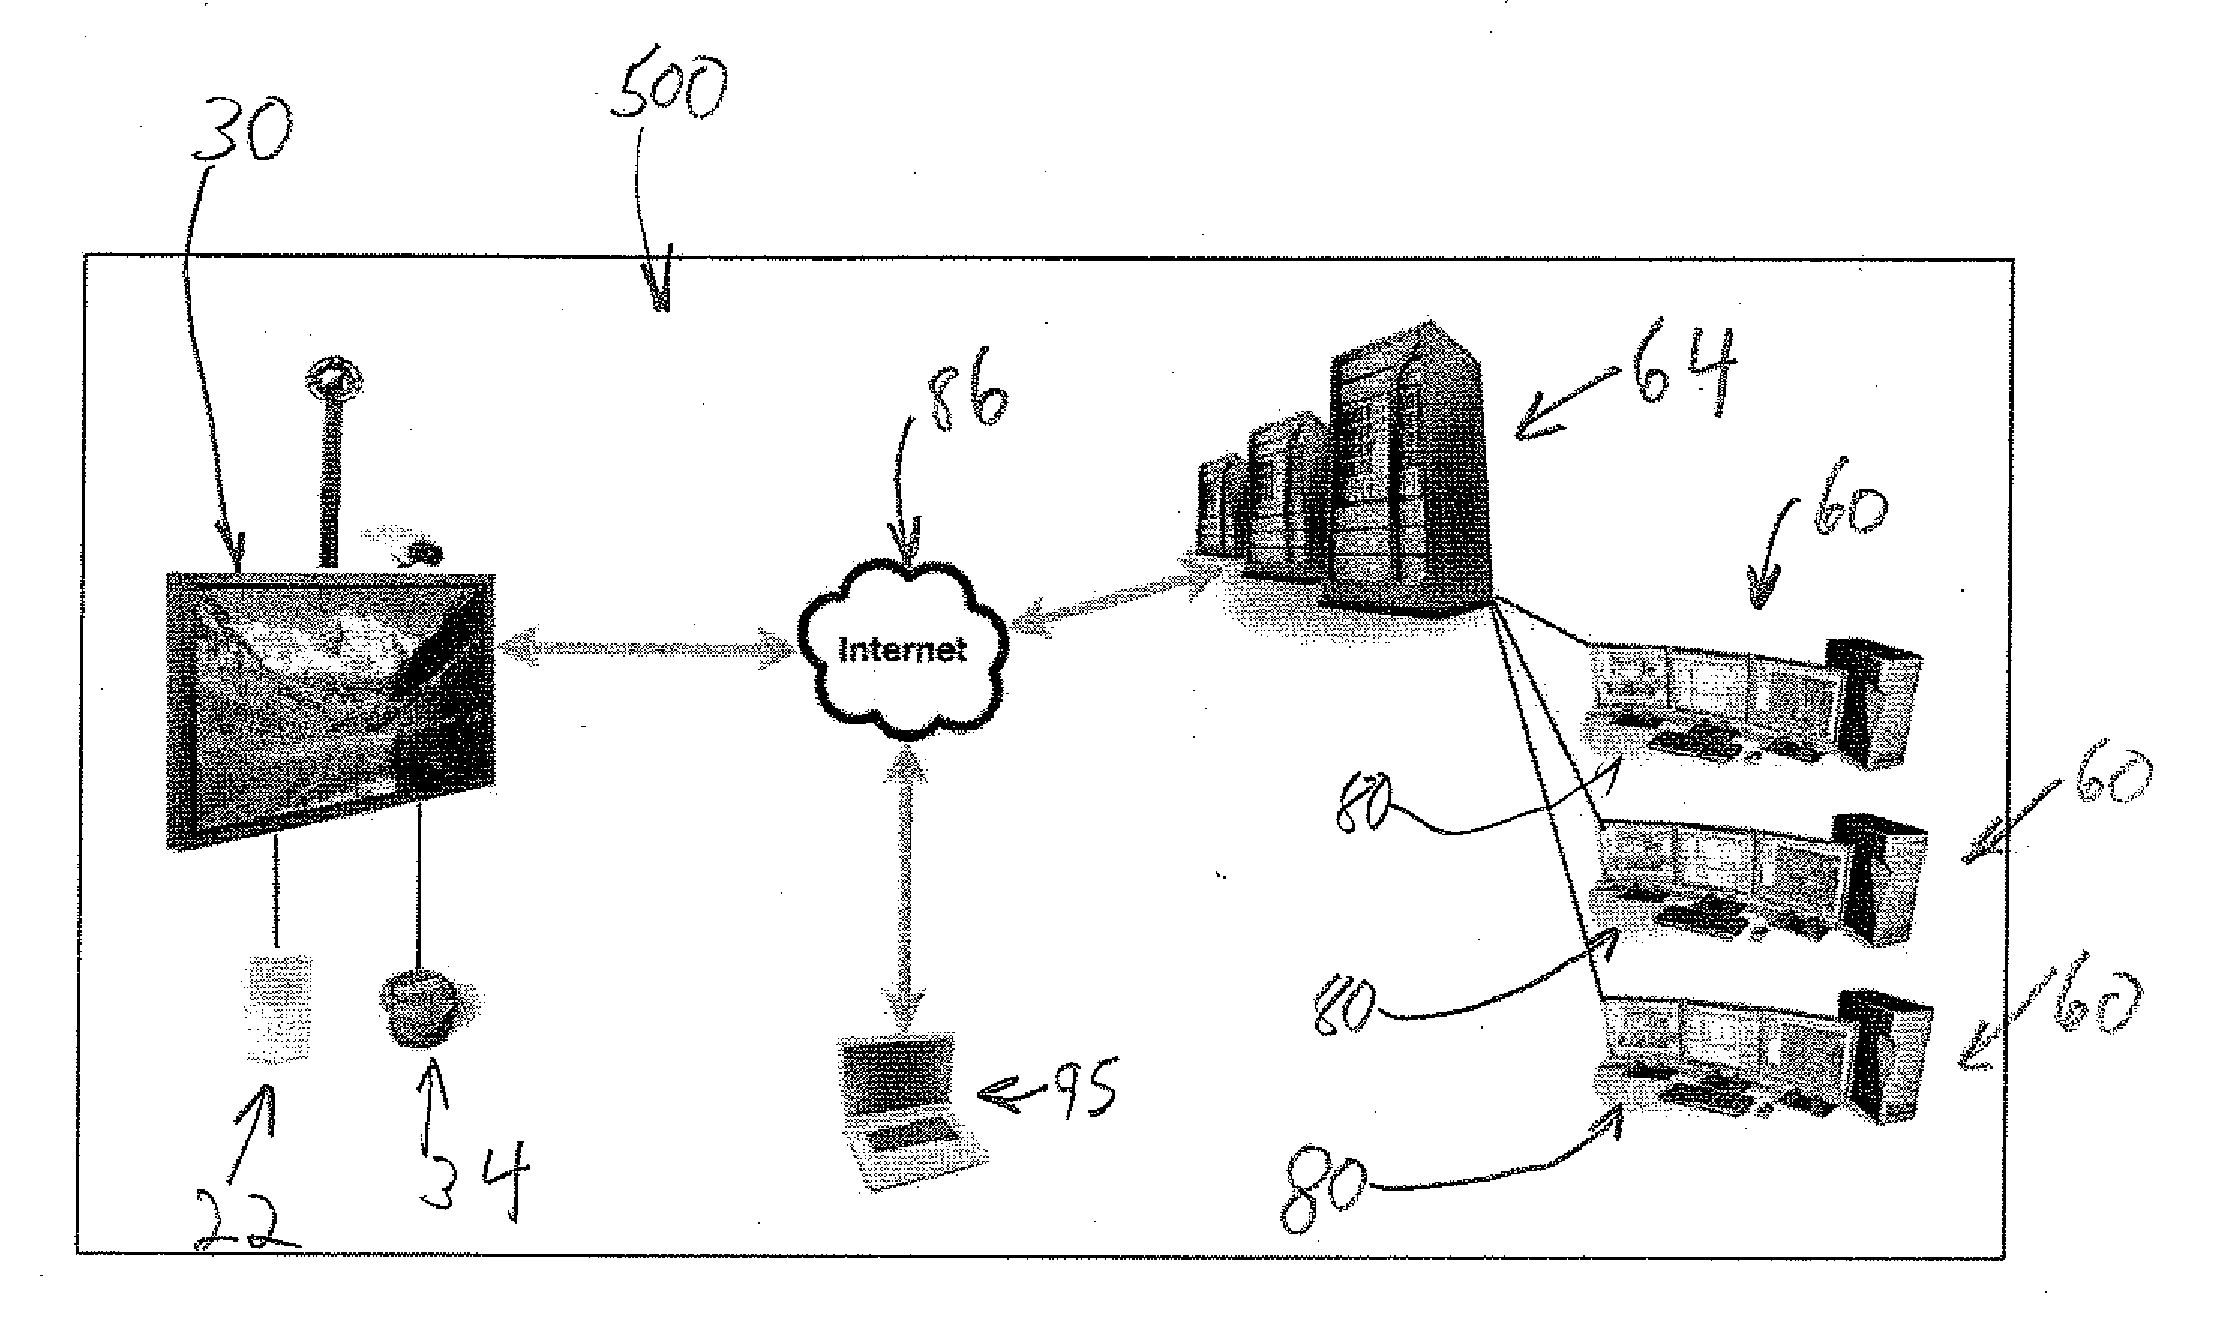 Video surveillance system and method with display advertising